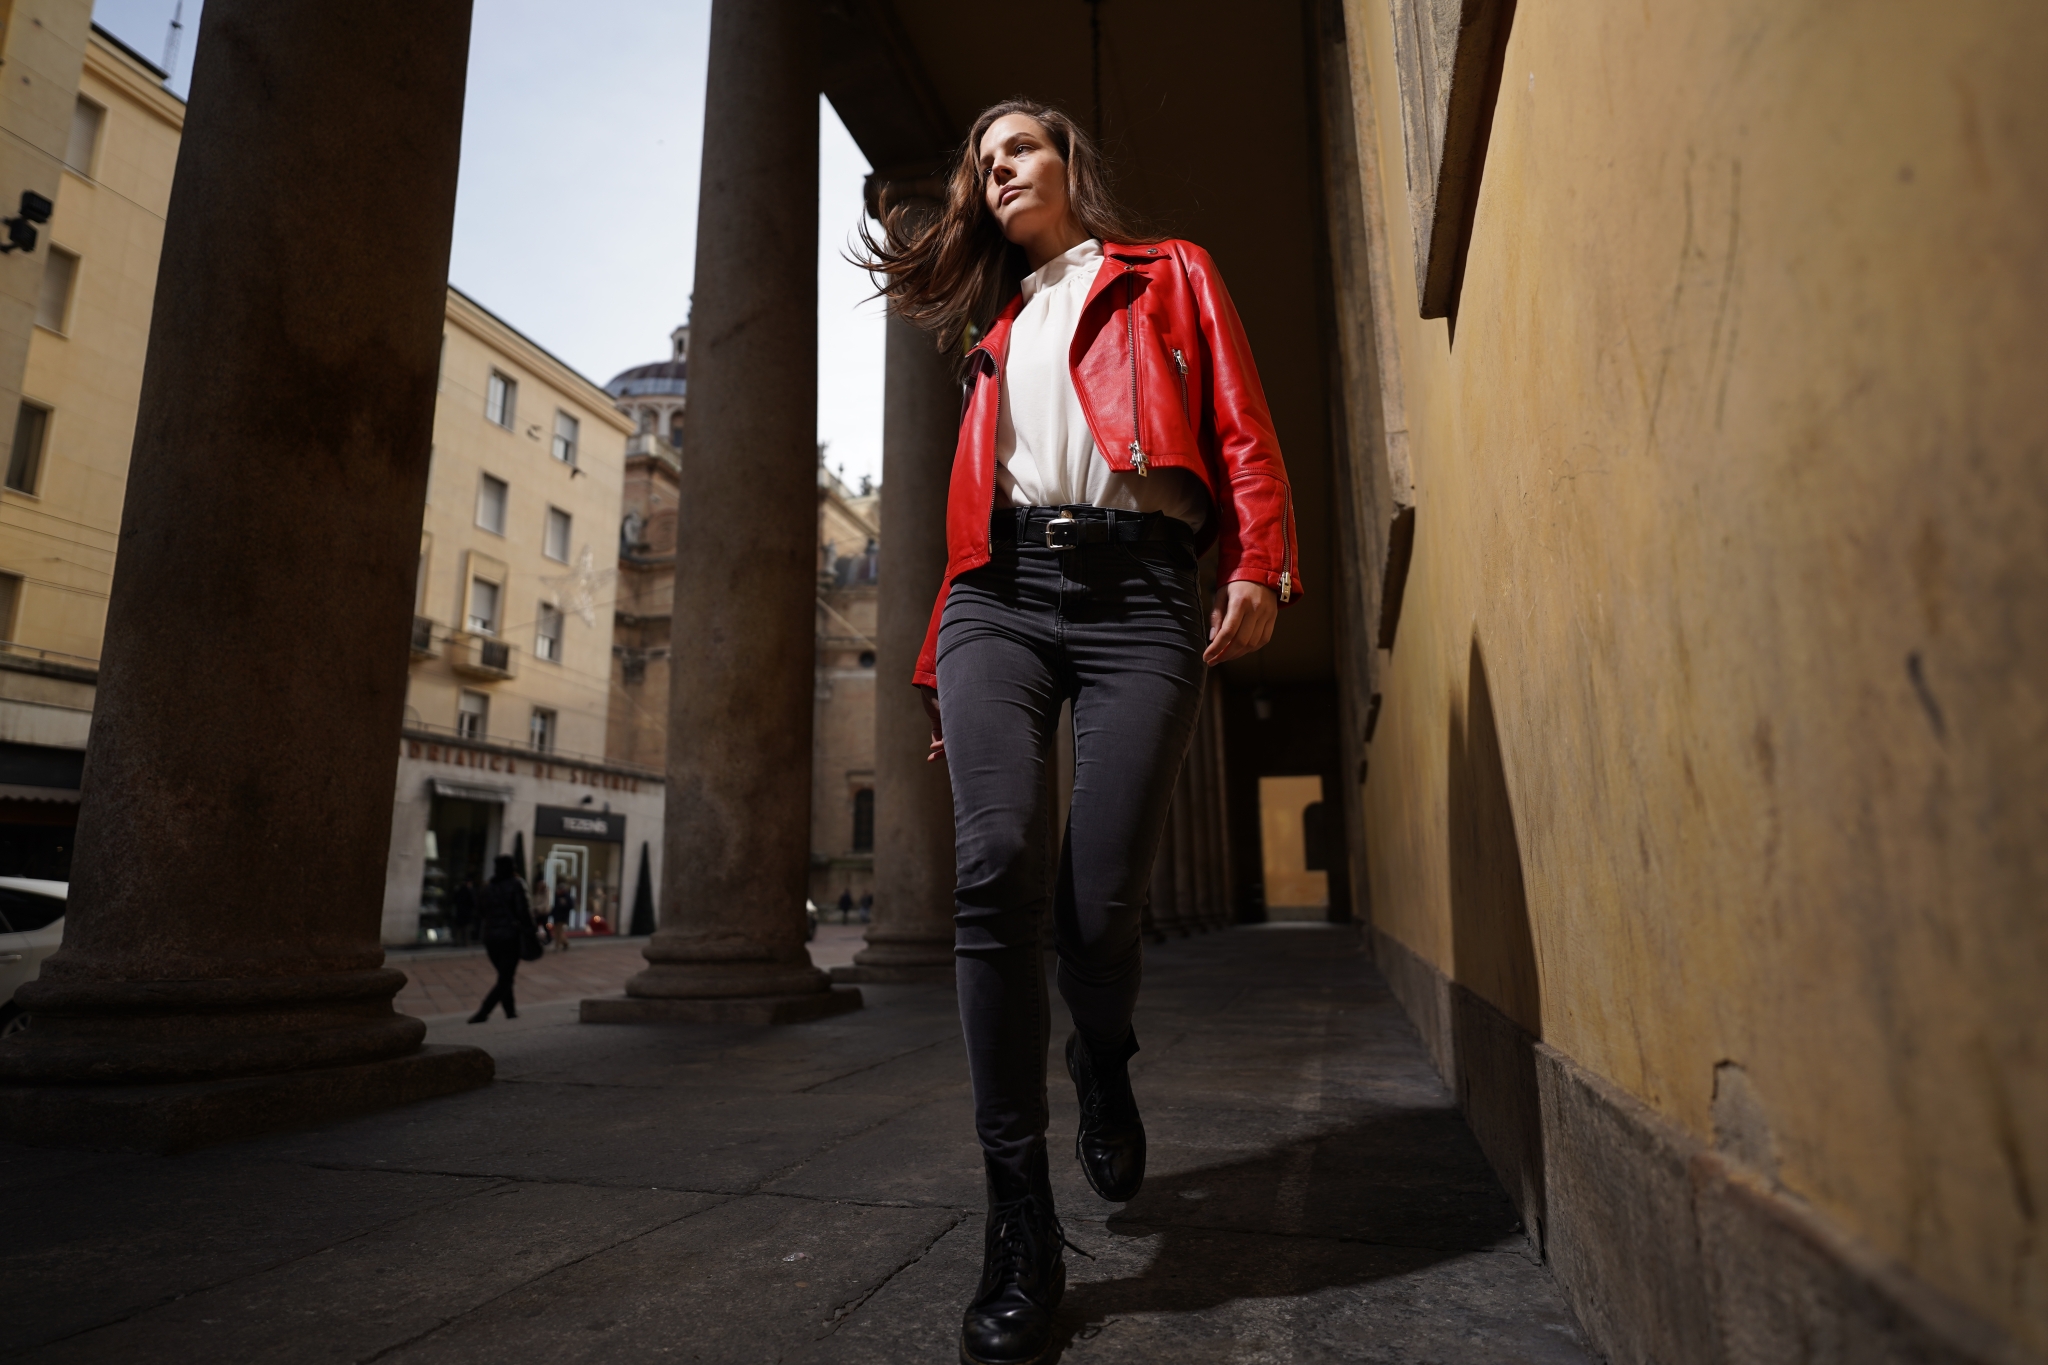 Female model in red jacket walking next to a building with columns